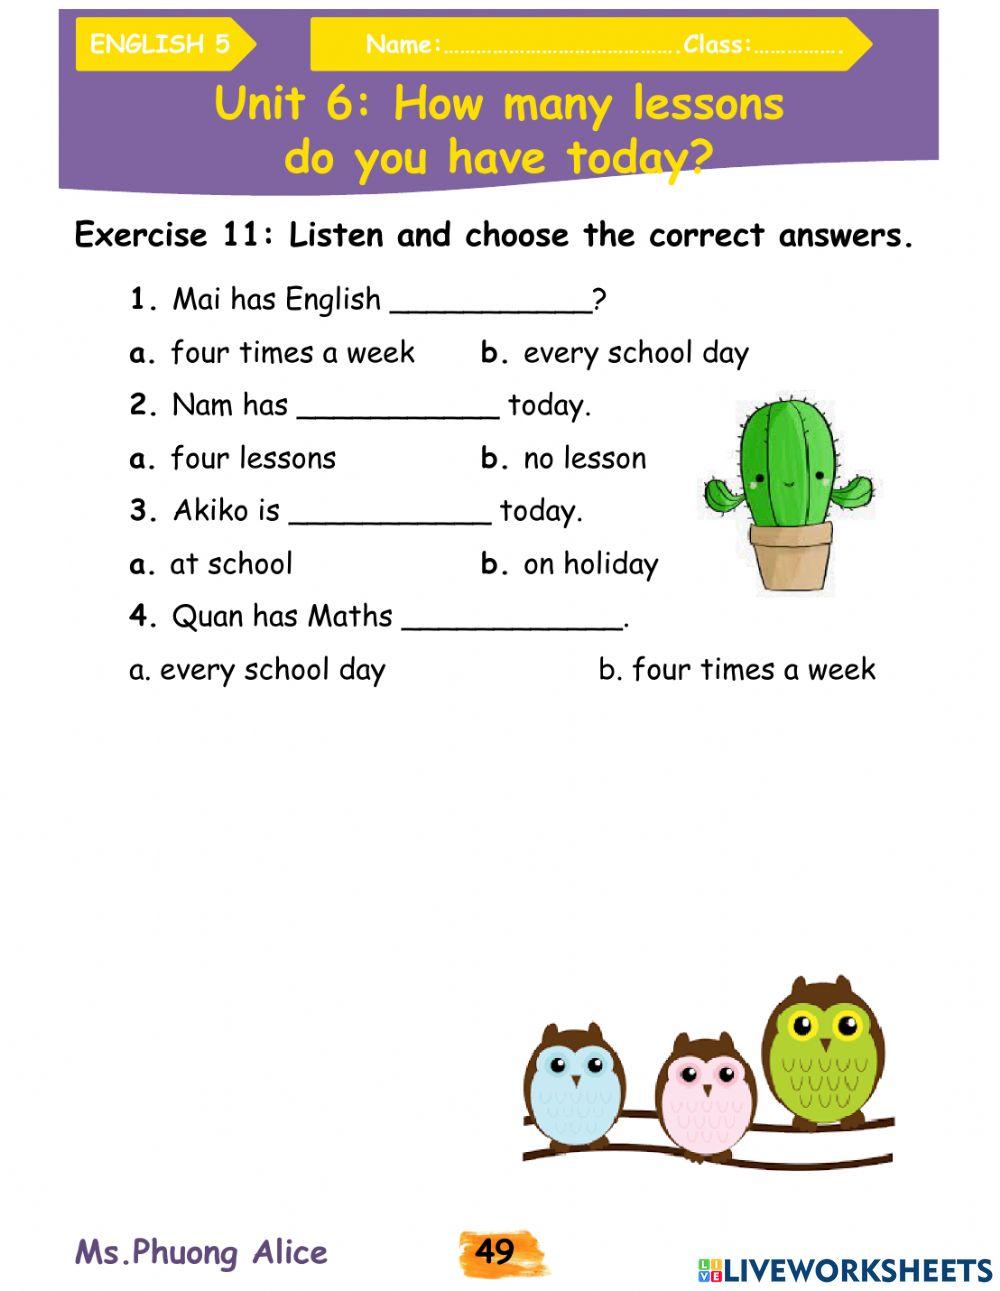 E5-U6-How many lessons do you have today?